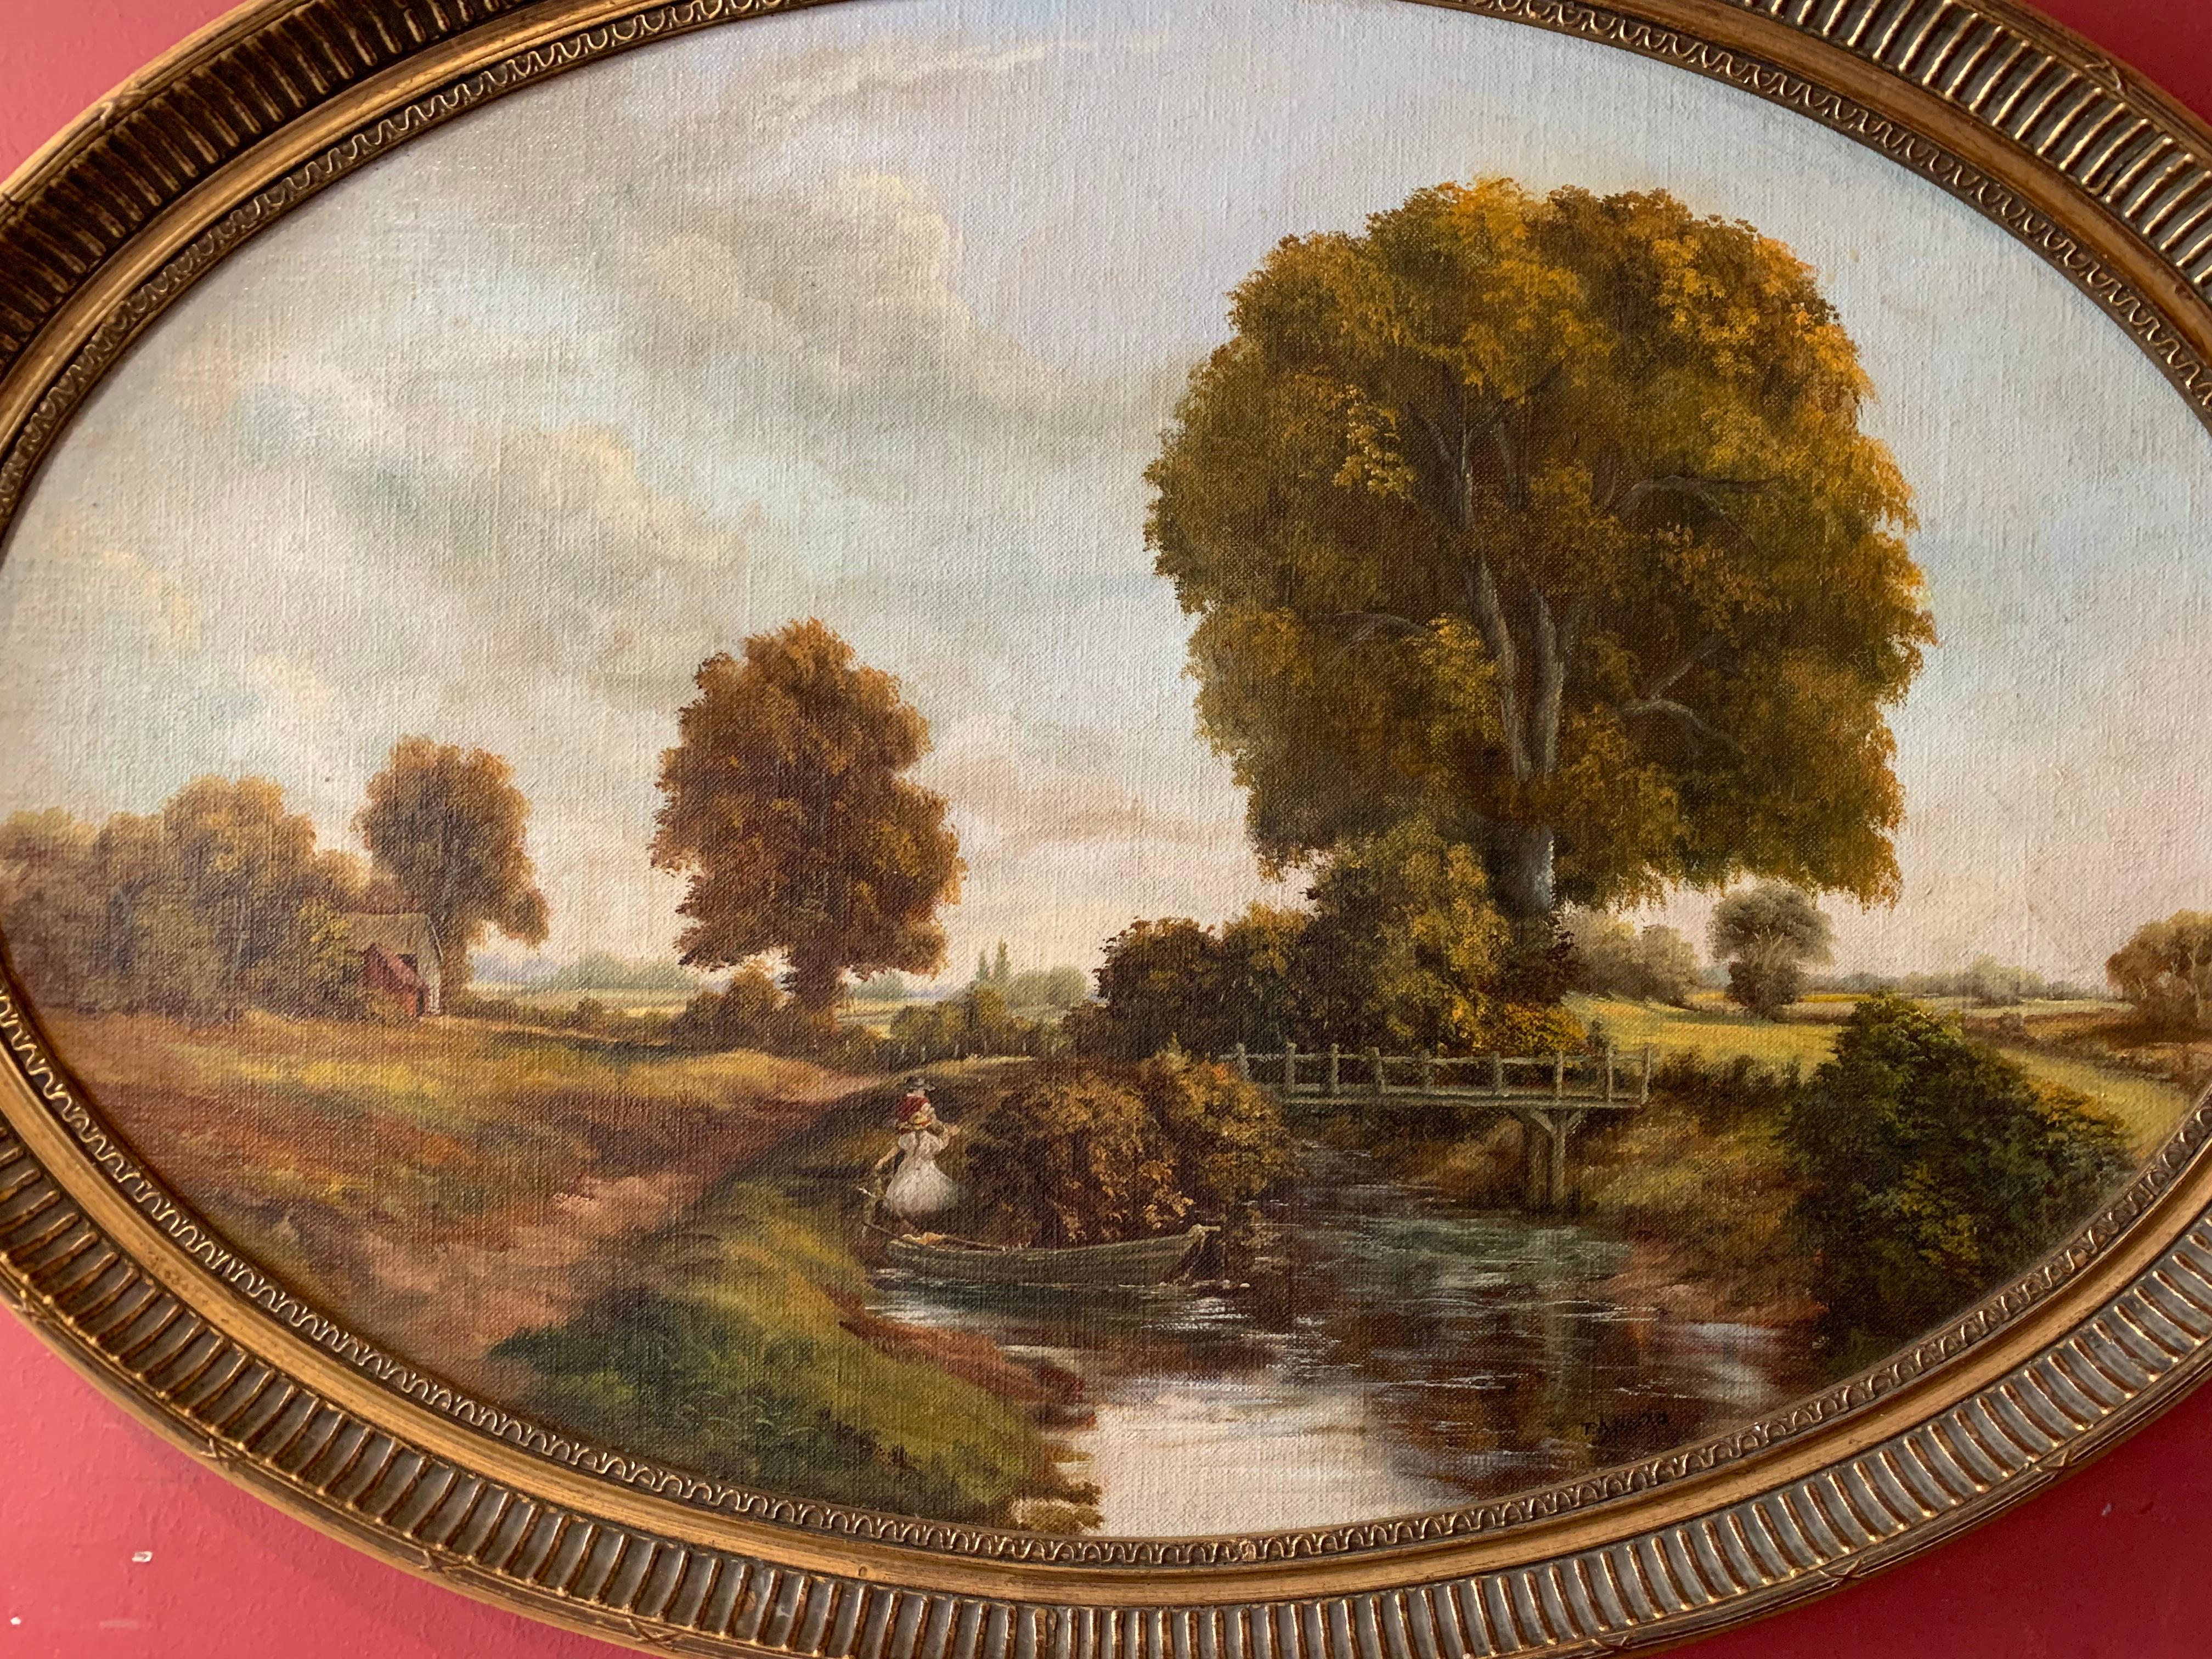 The Rural Landscape
British School, mid 20th century
oil painting on board, framed
framed: 35.5 x 45.5 inches

Lovely traditional rural landscape with figures in the foreground. A most charming and signed original English School oil painting -